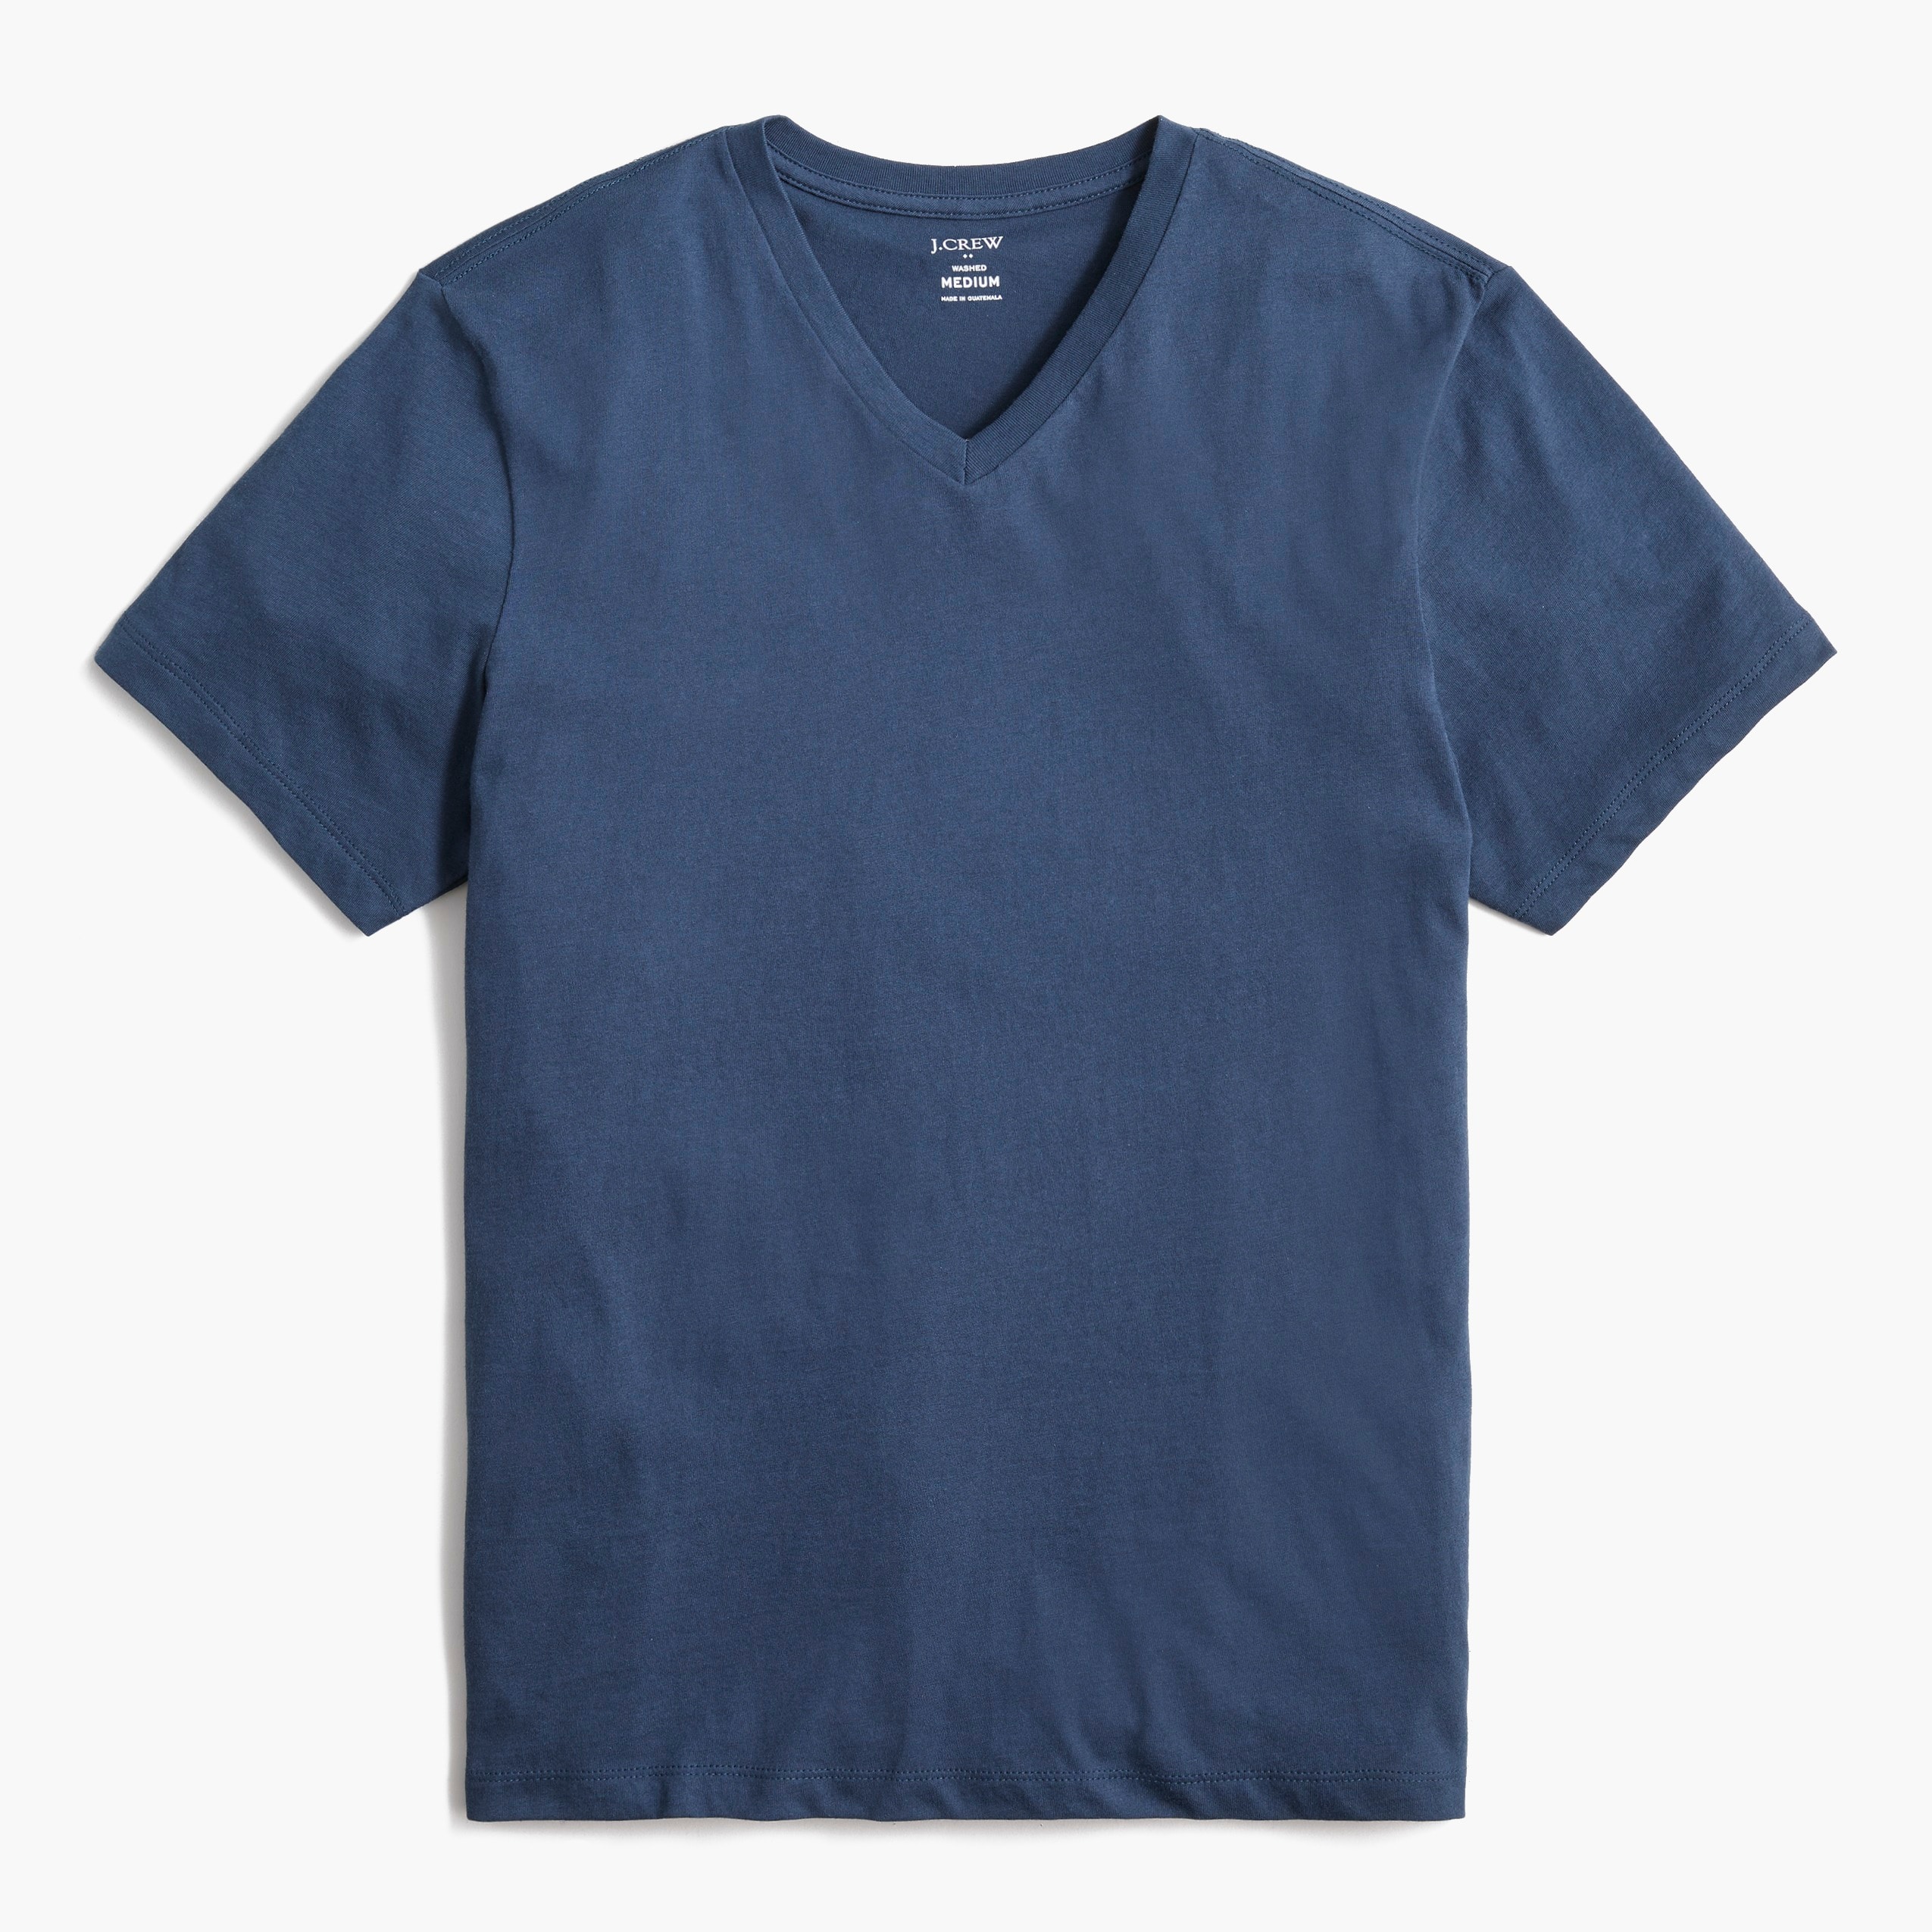  Washed jersey V-neck tee